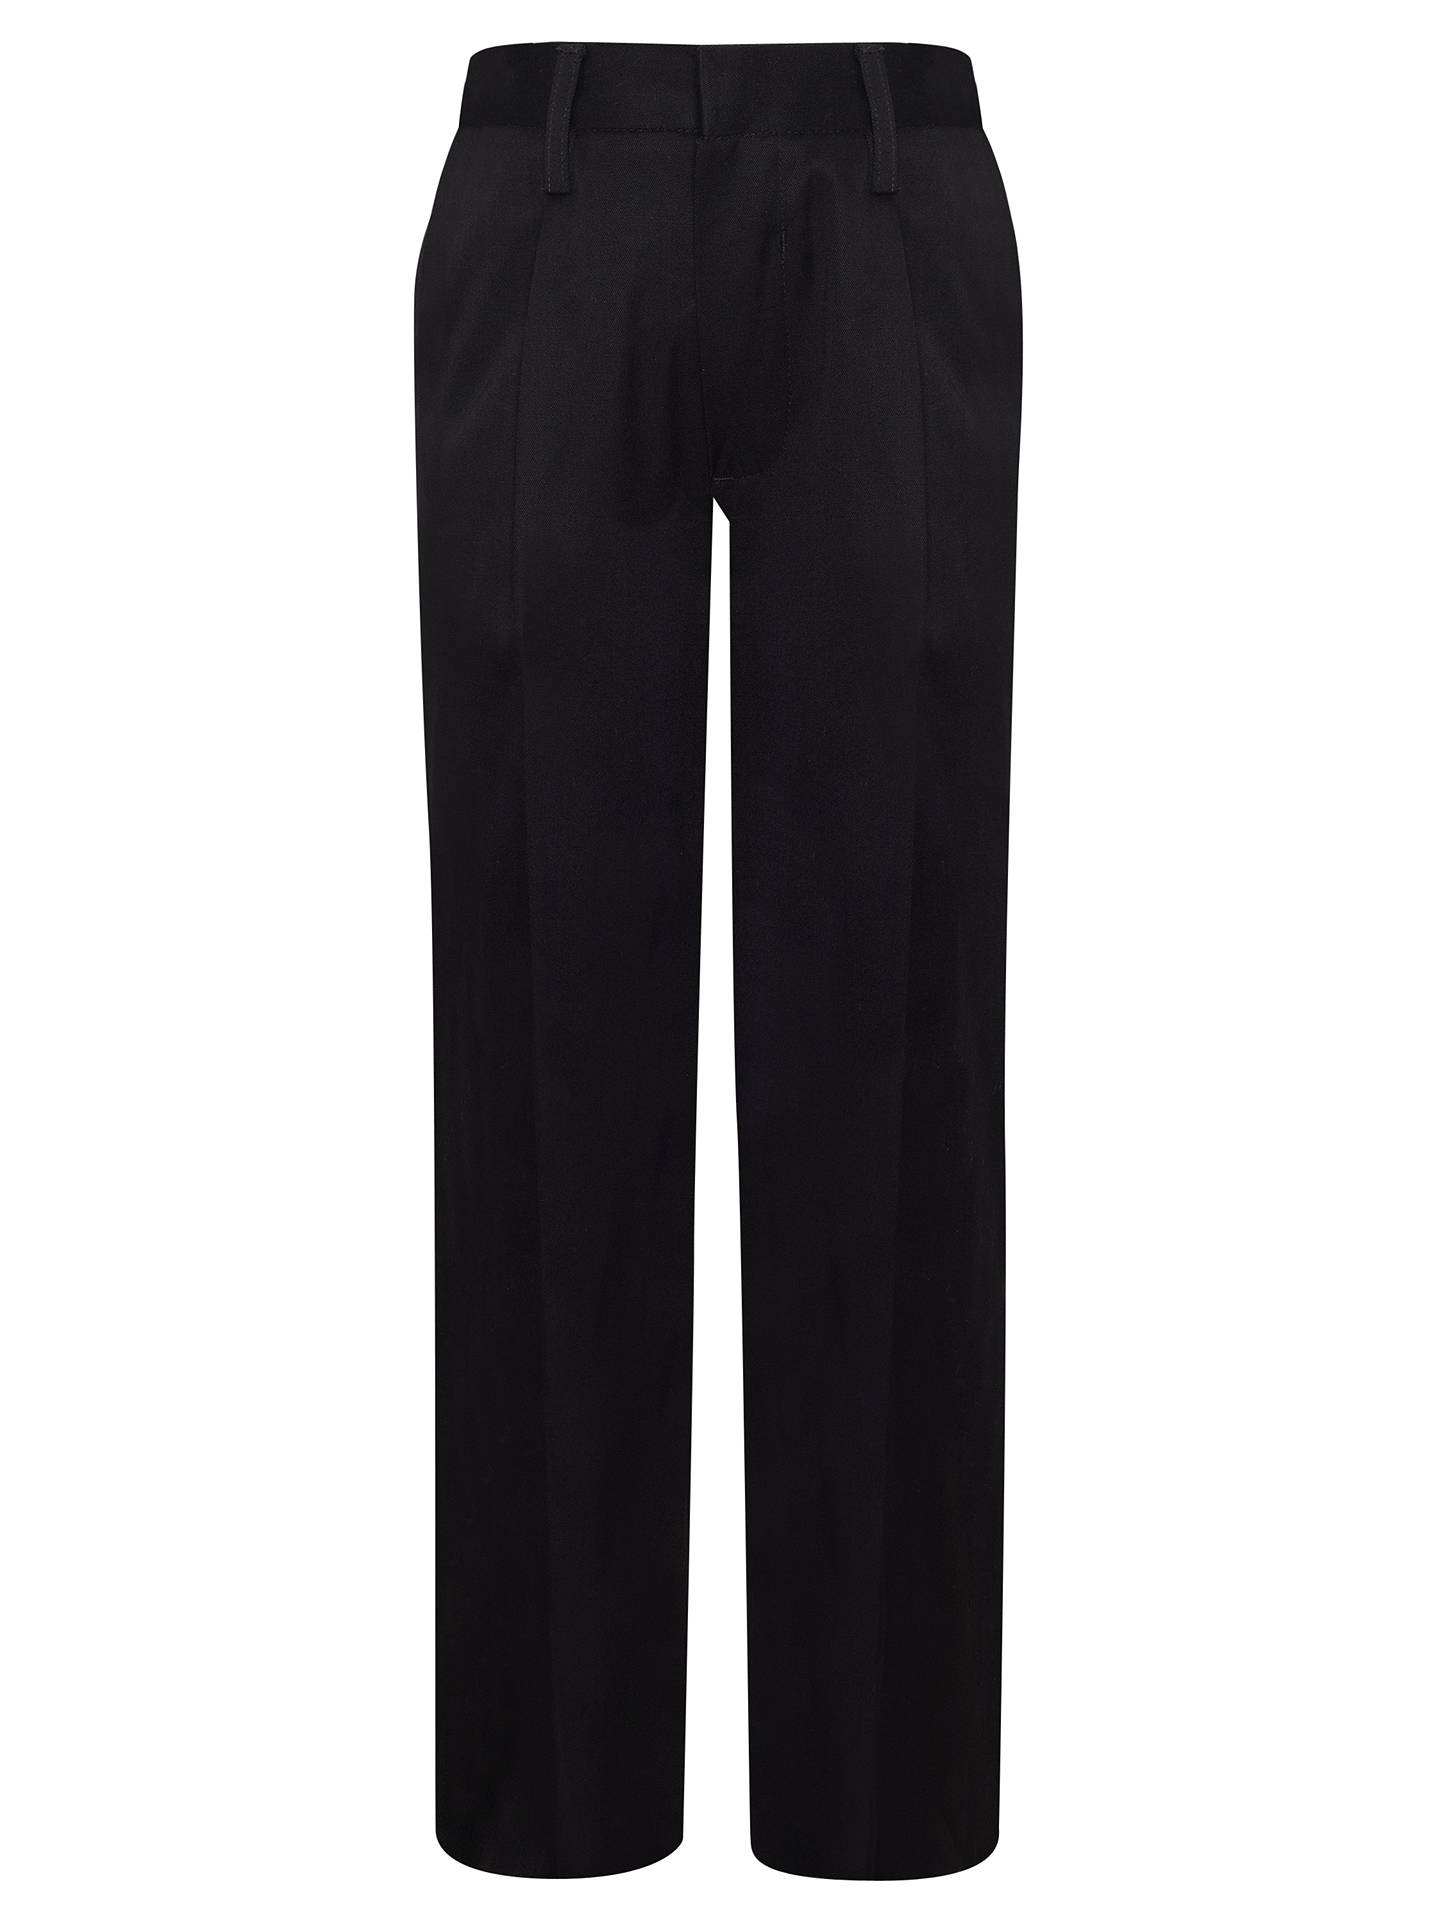 Clothes, Shoes & Accessories Girls School Trousers Black Grey Navy ...